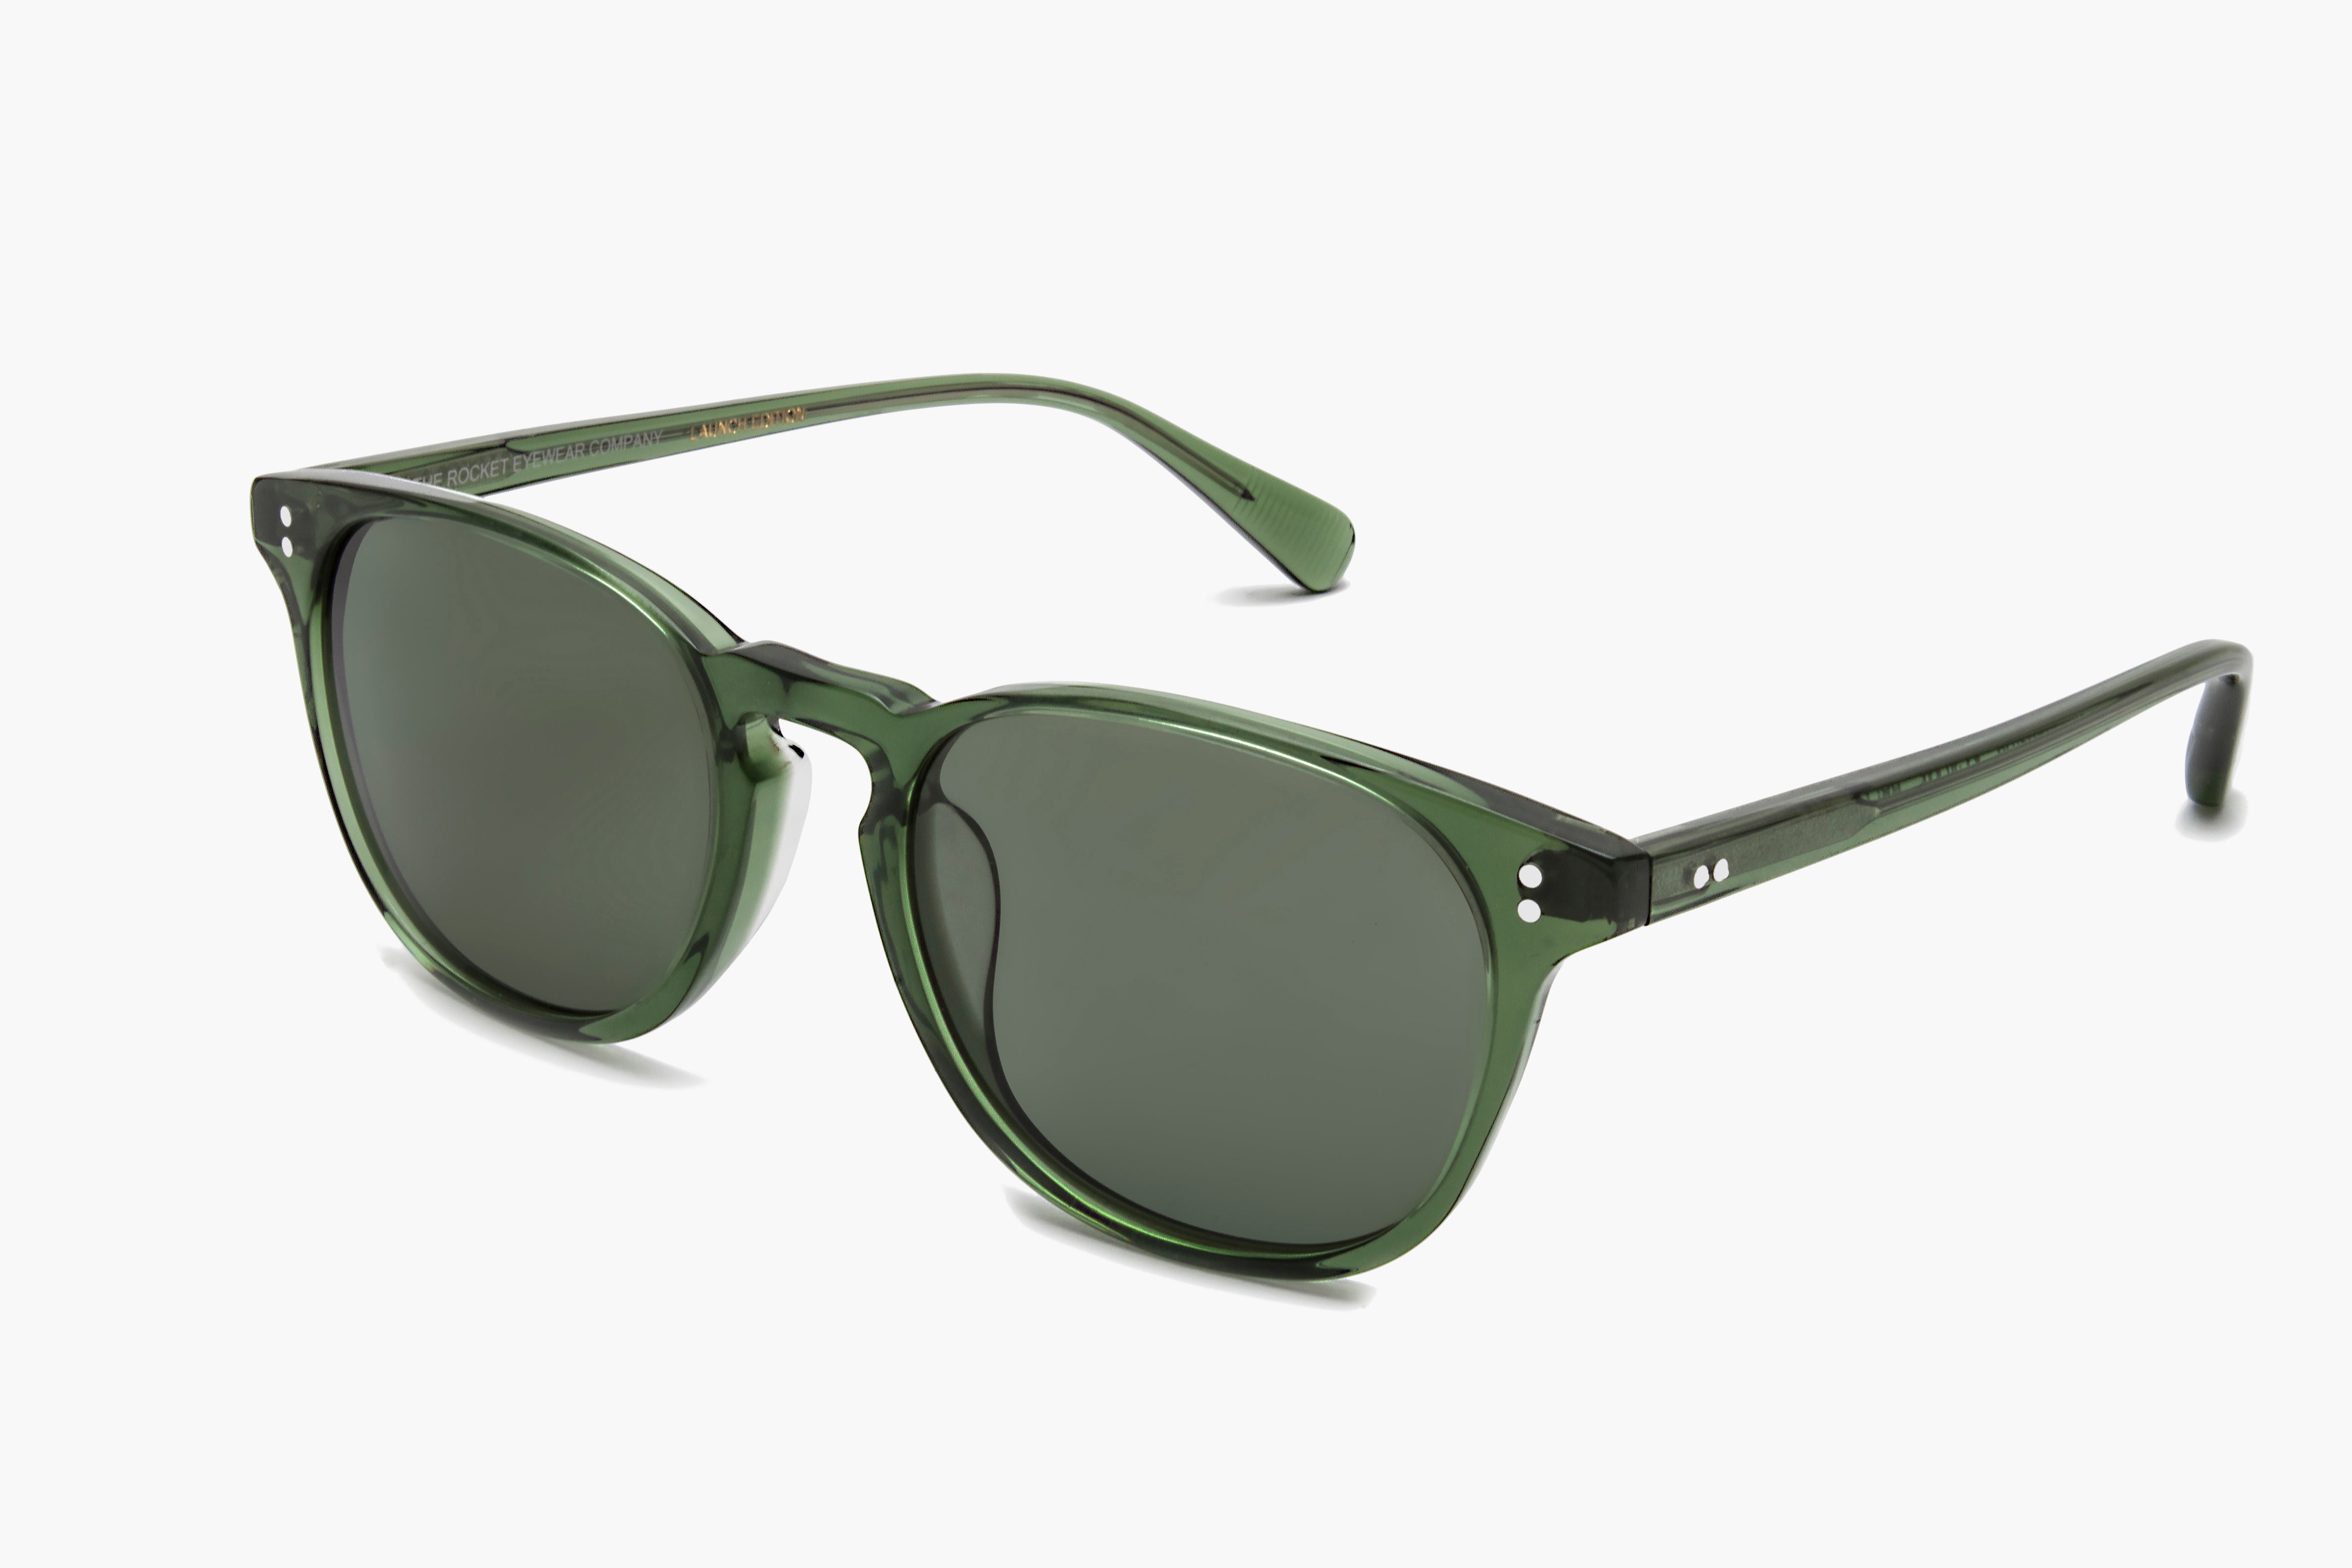 Rocket MTO P3 Classic Hunter Green Clear with Green Polarized Lenses (Launch Edition)